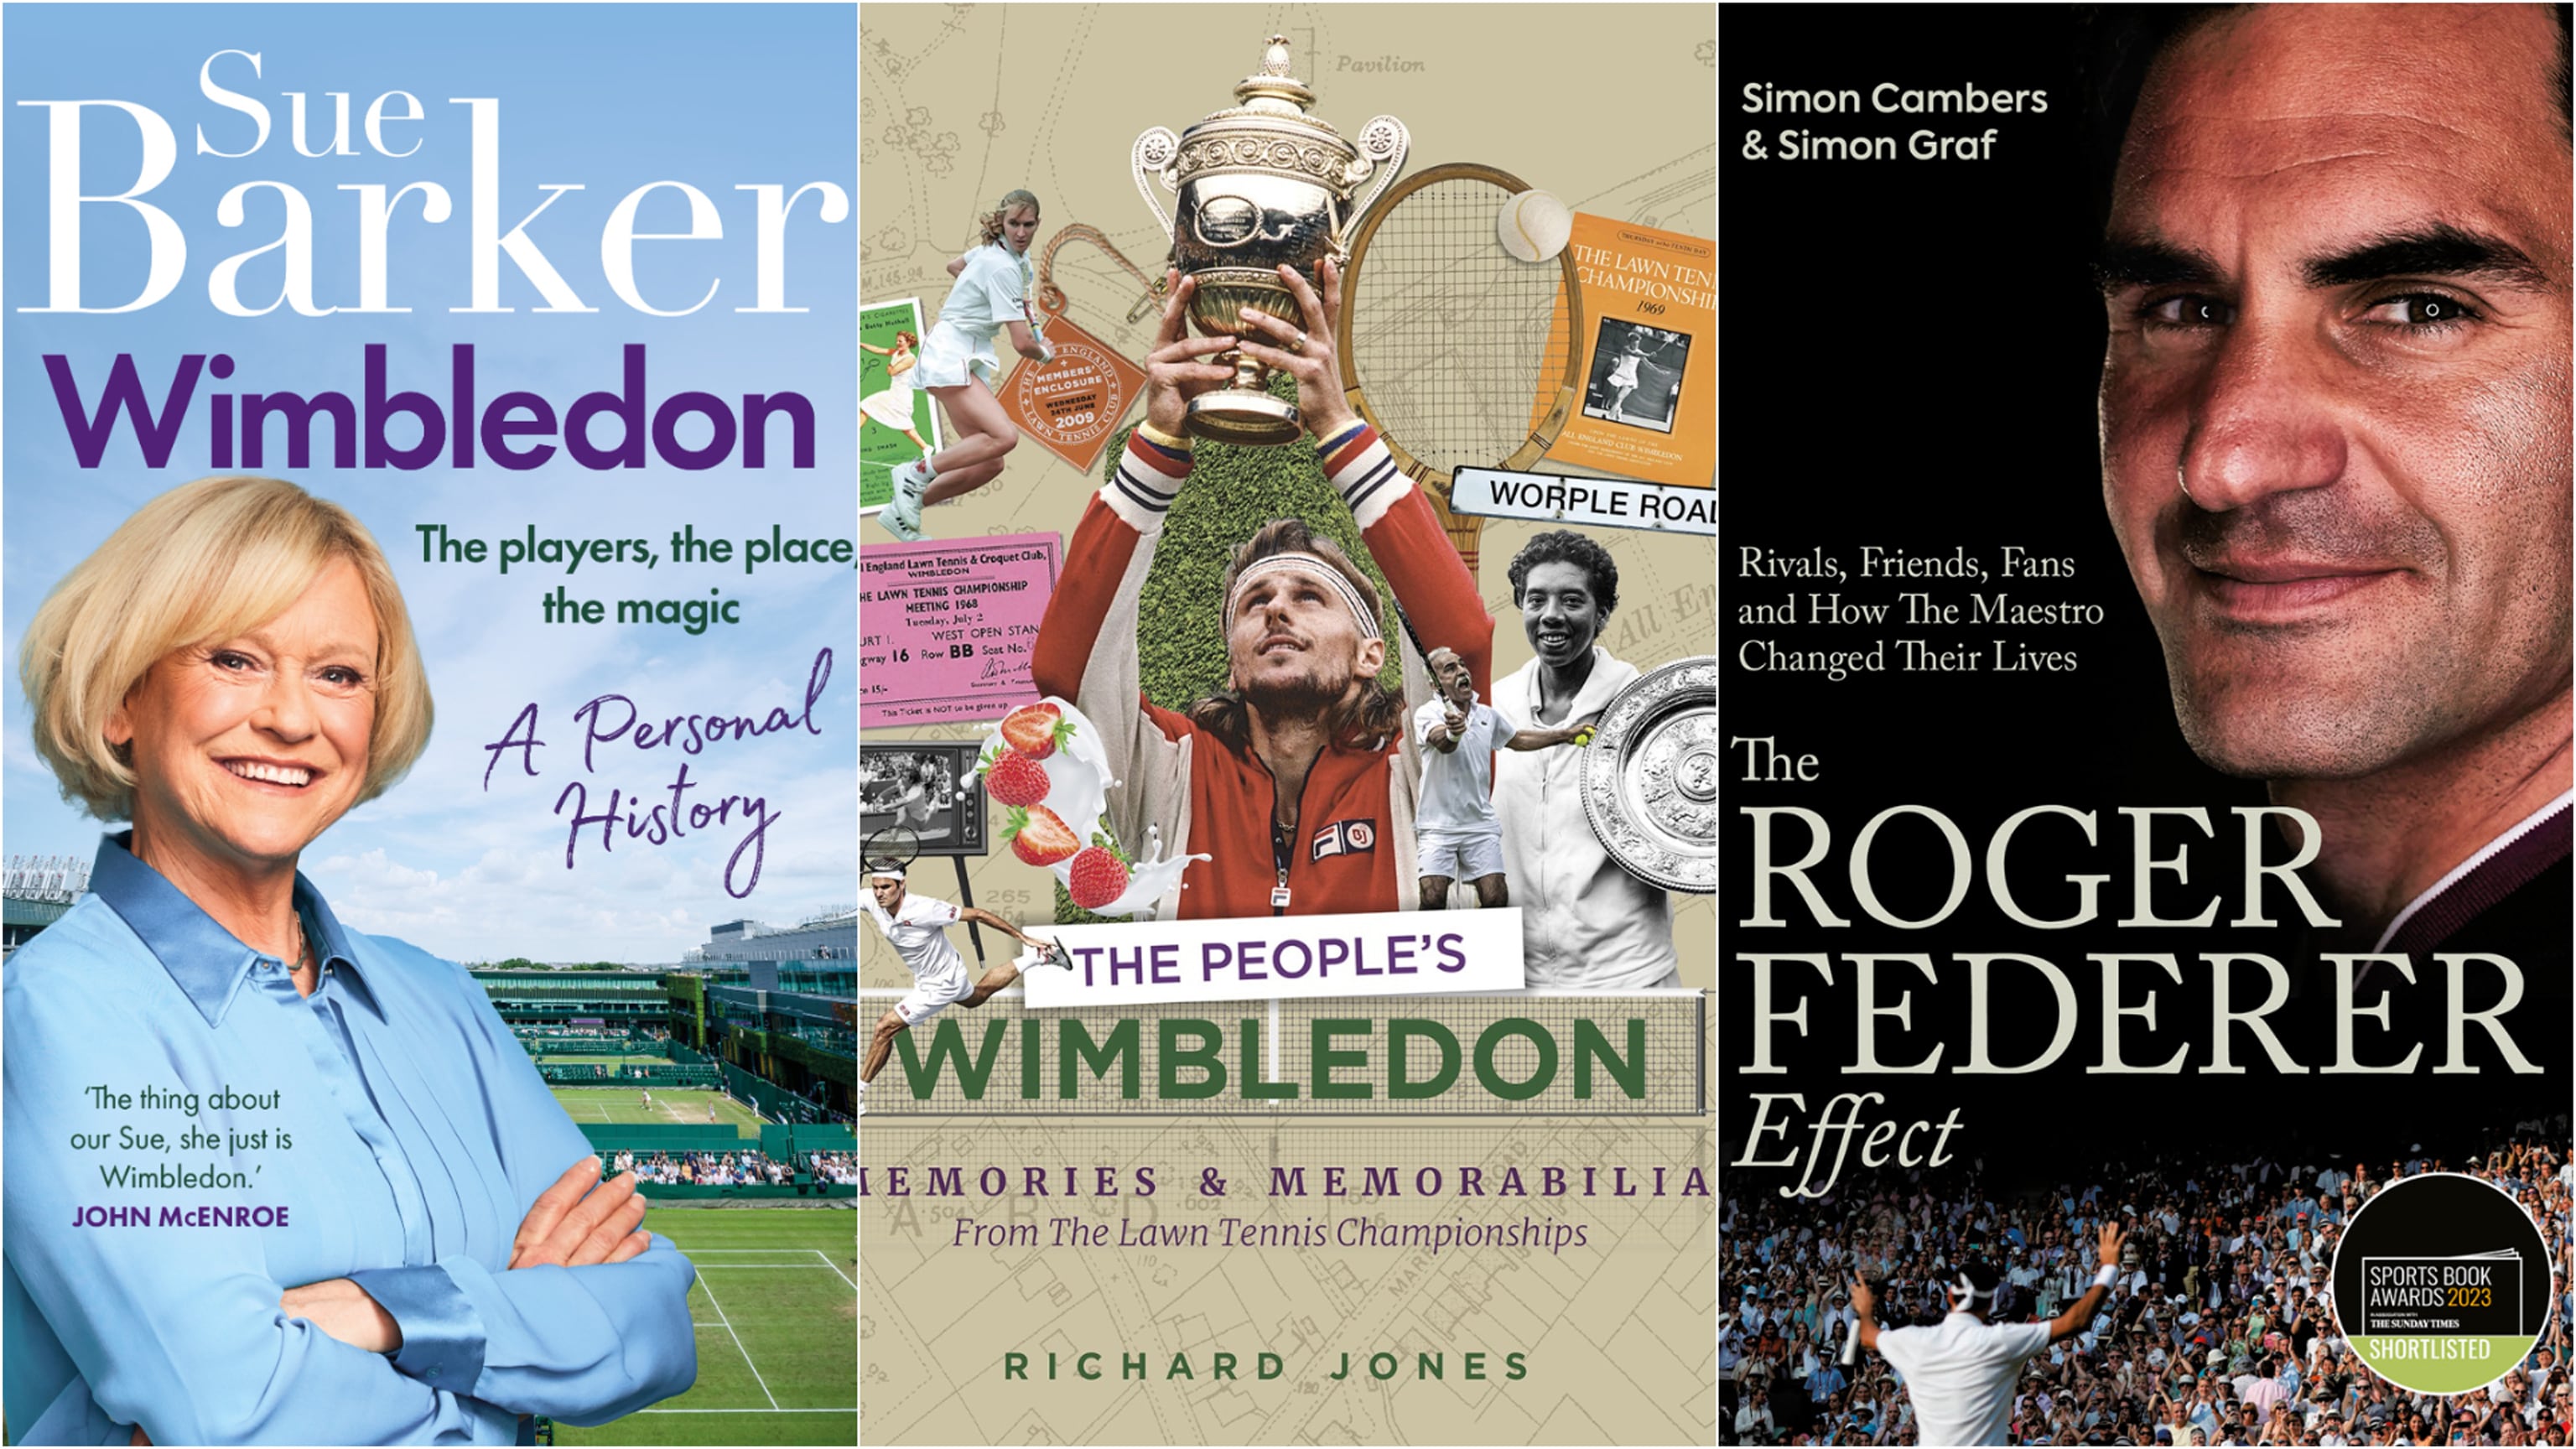 These Wimbledon-themed reads are perfect accompaniment to the tournament